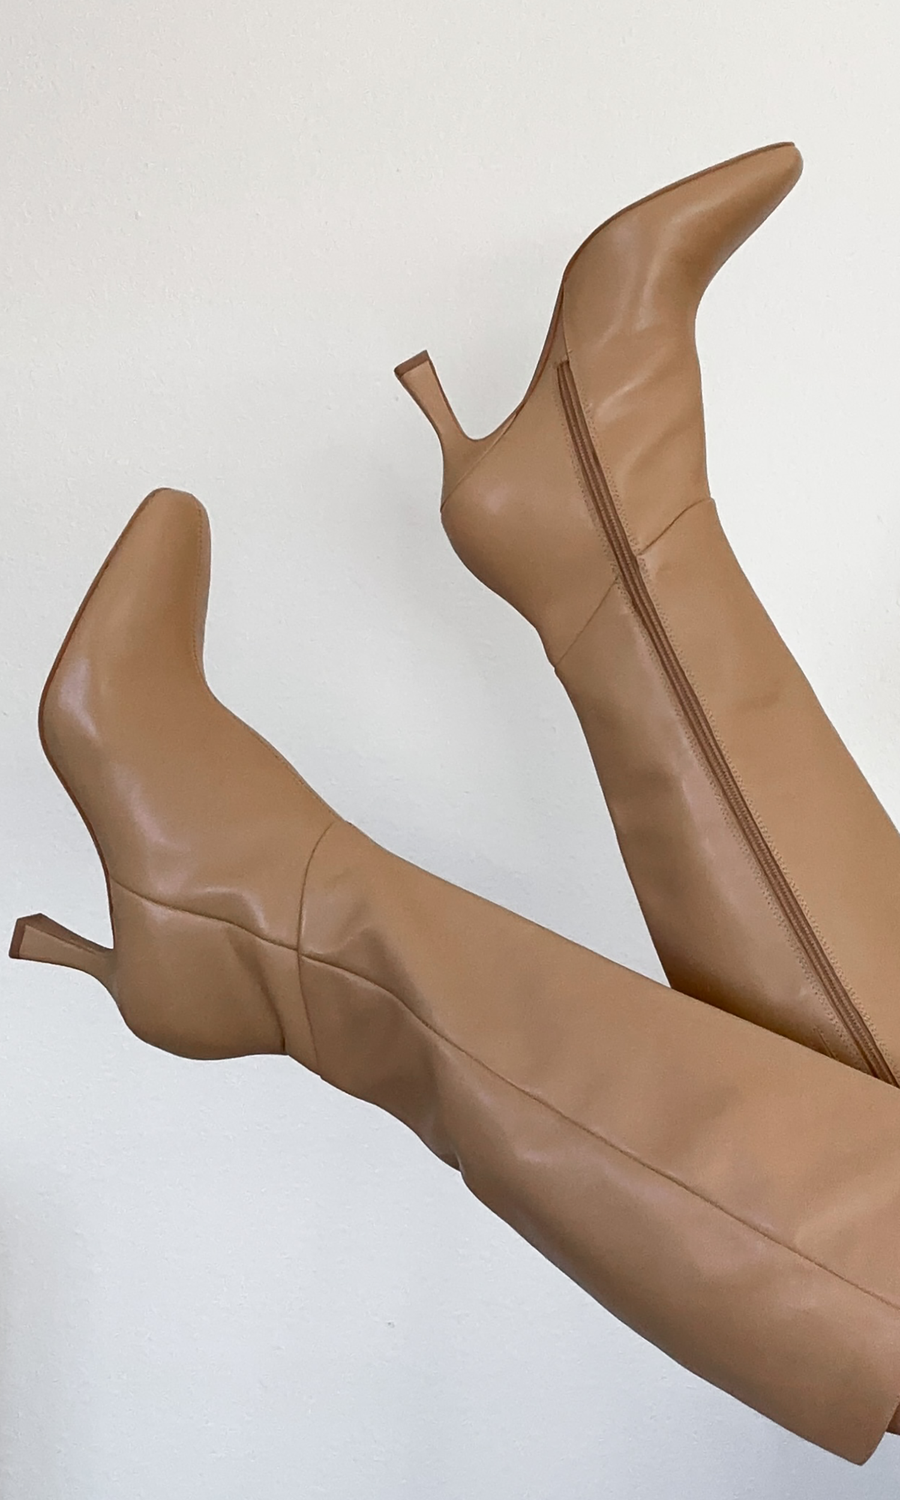 Gyra Boots by Dolce Vita - FINAL SALE